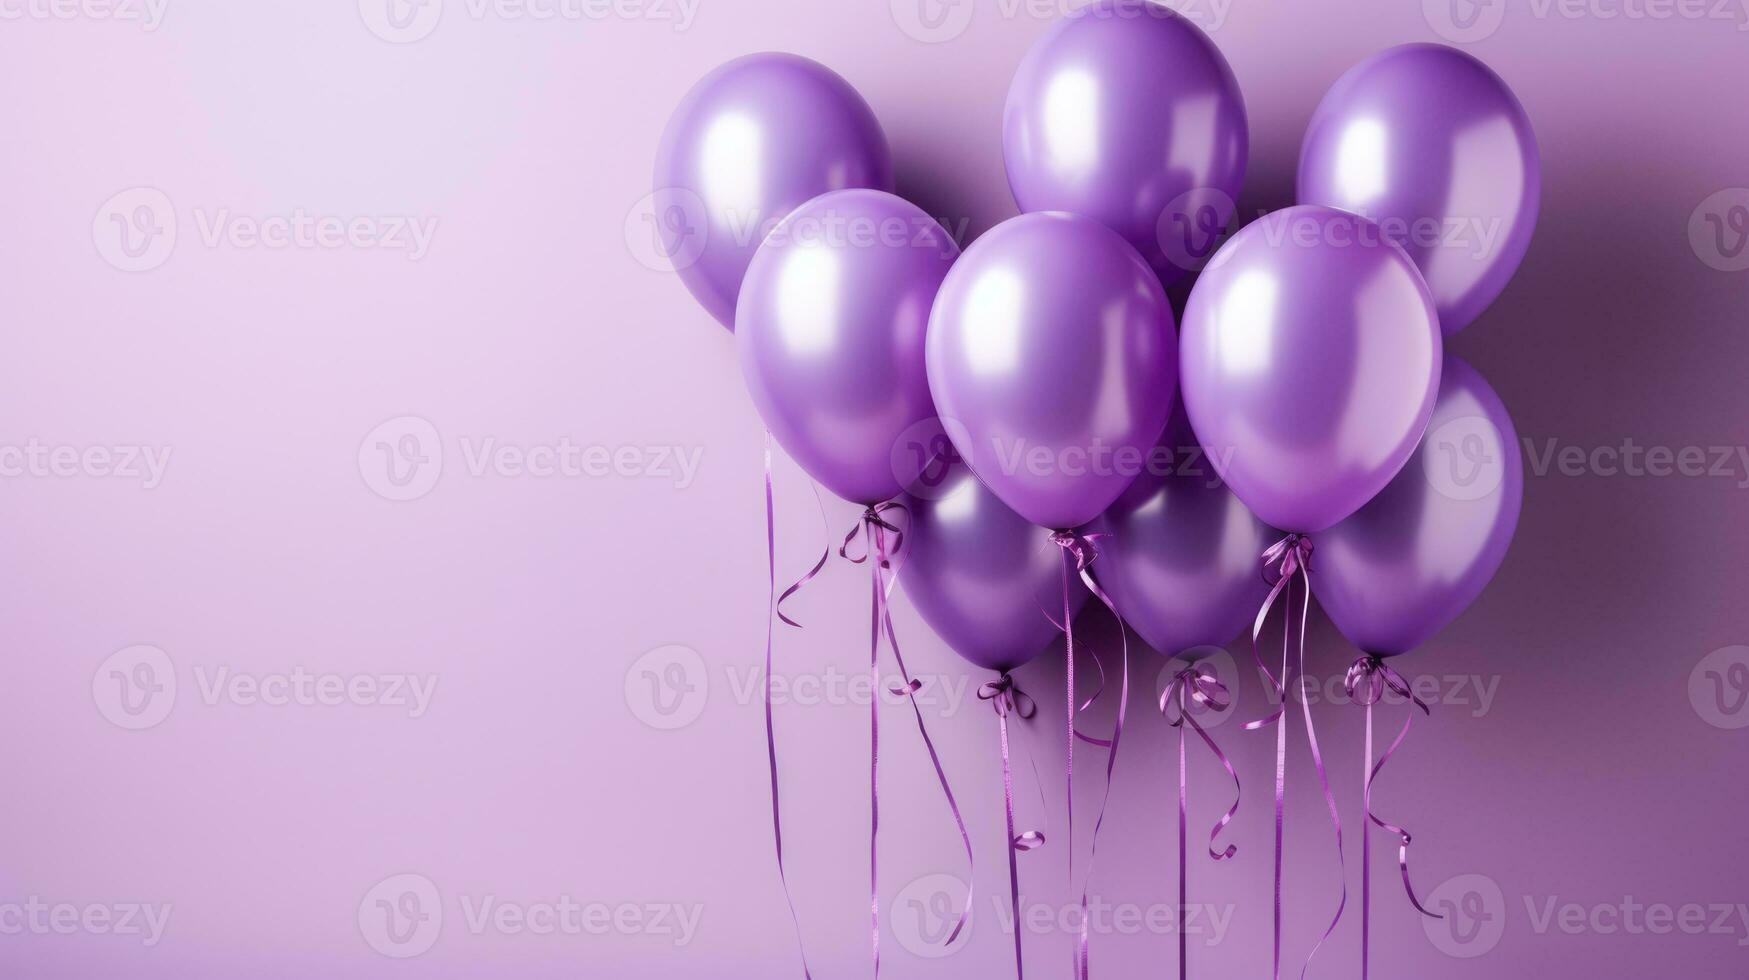 Purple balloons rising at an epilepsy awareness event isolated on a gradient background photo